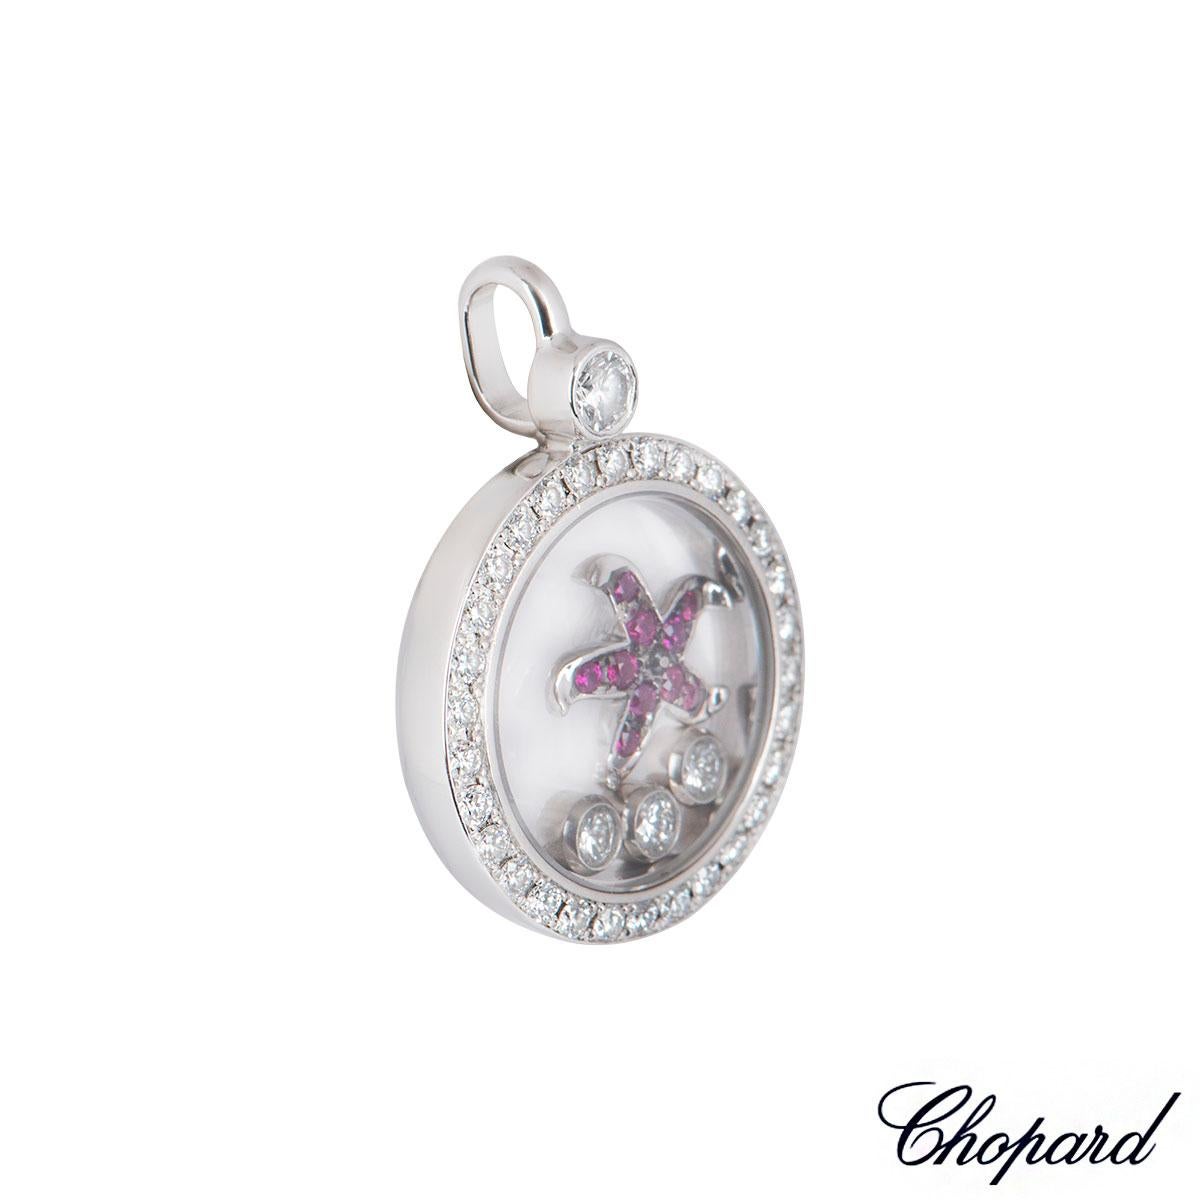 An 18k white gold diamond and ruby pendant by Chopard from the Happy Diamonds collection. The pendant features a pave set bezel with round brilliant cut diamonds and 3 floating diamonds with a ruby set starfish encased behind the iconic Chopard